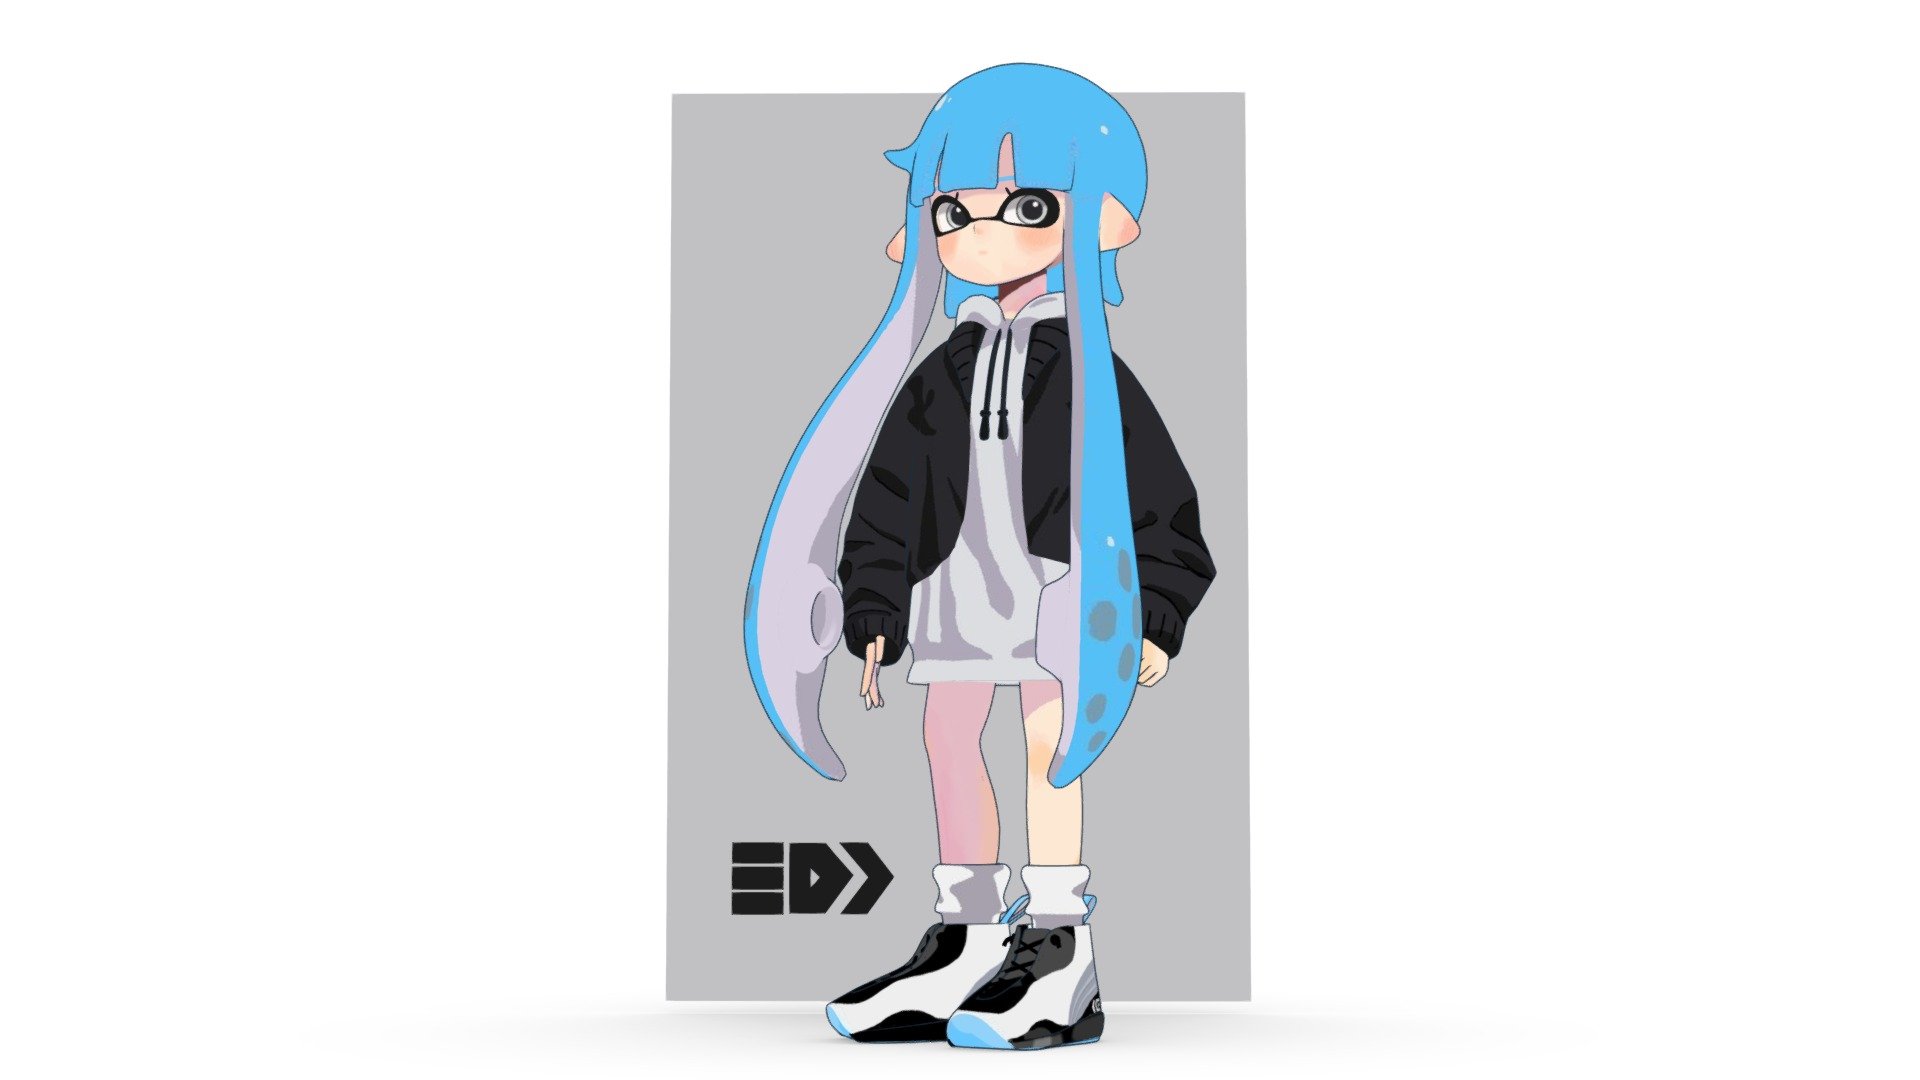 I have done quite a number of tweaking to find a good balance of the proportions of her face, but I'm happy to have it finalized!

3D rendition of the cute illustration by まこ, check out more from her twitter account!
 - Splatoon Girl - 3D model by Akiko.Tomiyoshi 3d model